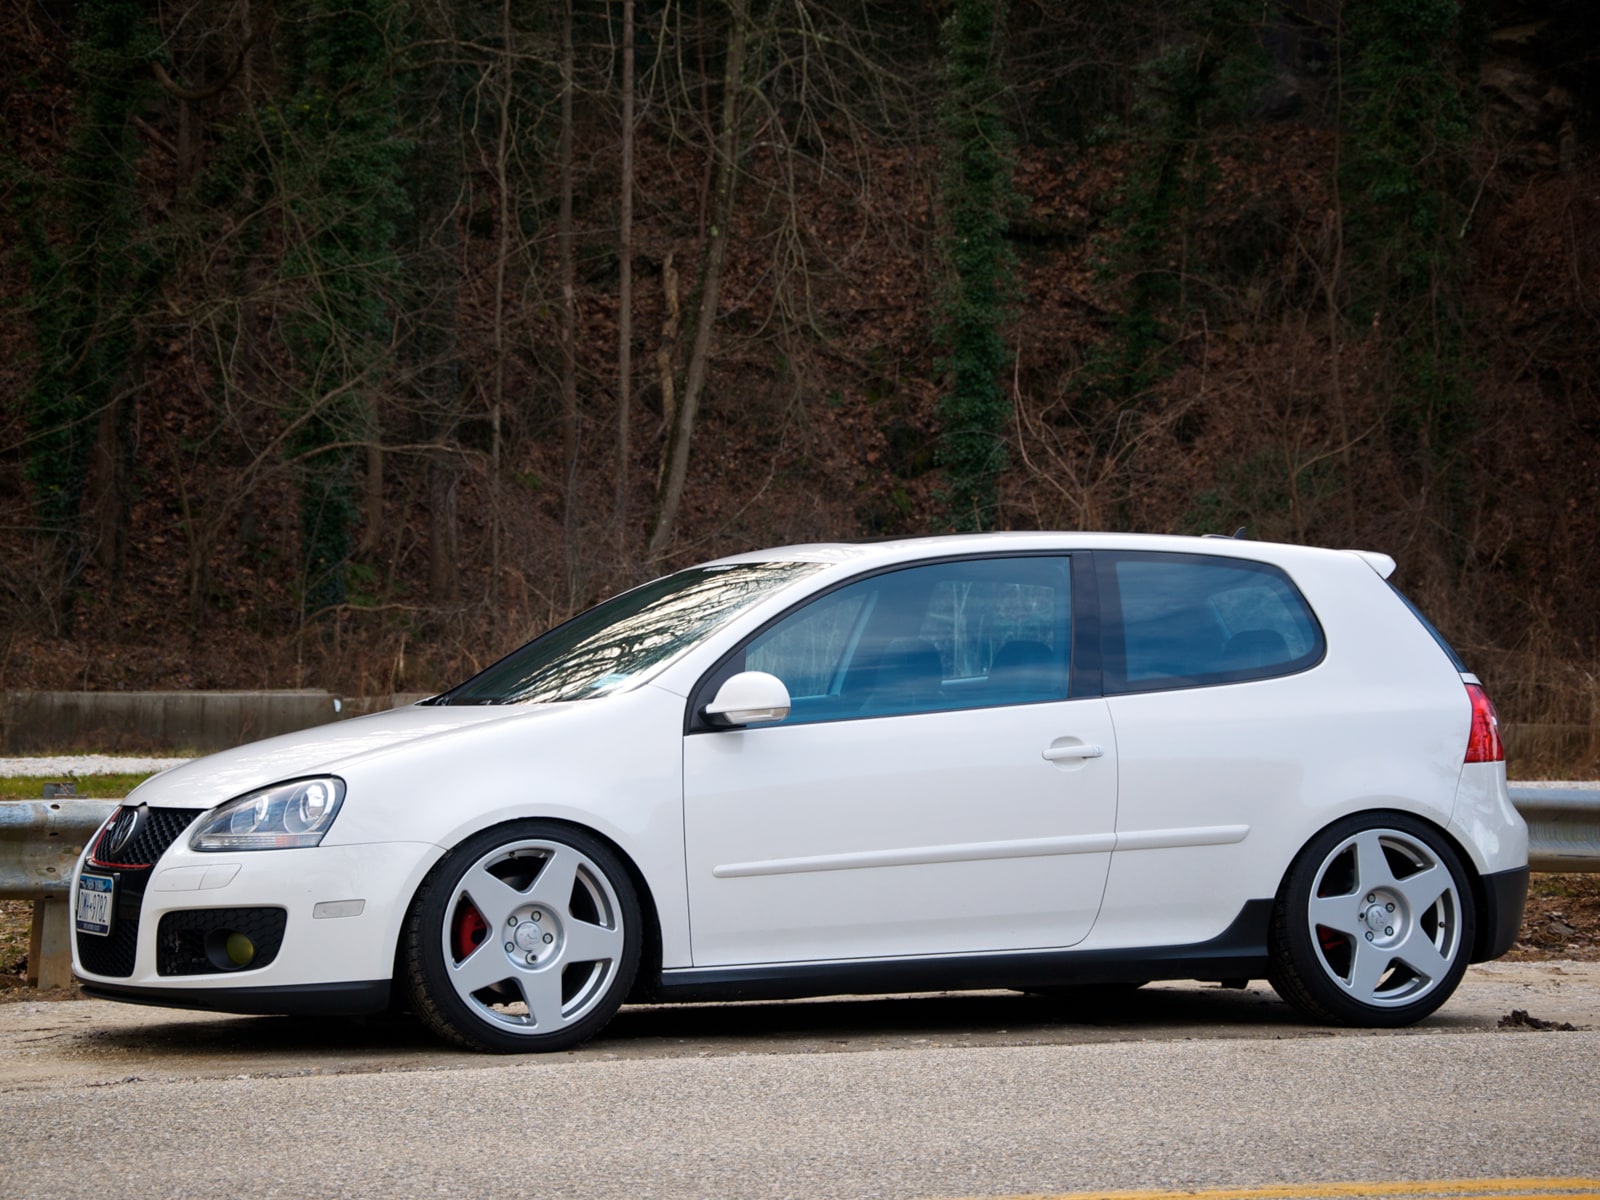 2006 Volkswagen Golf GTI Project Car: Act 2